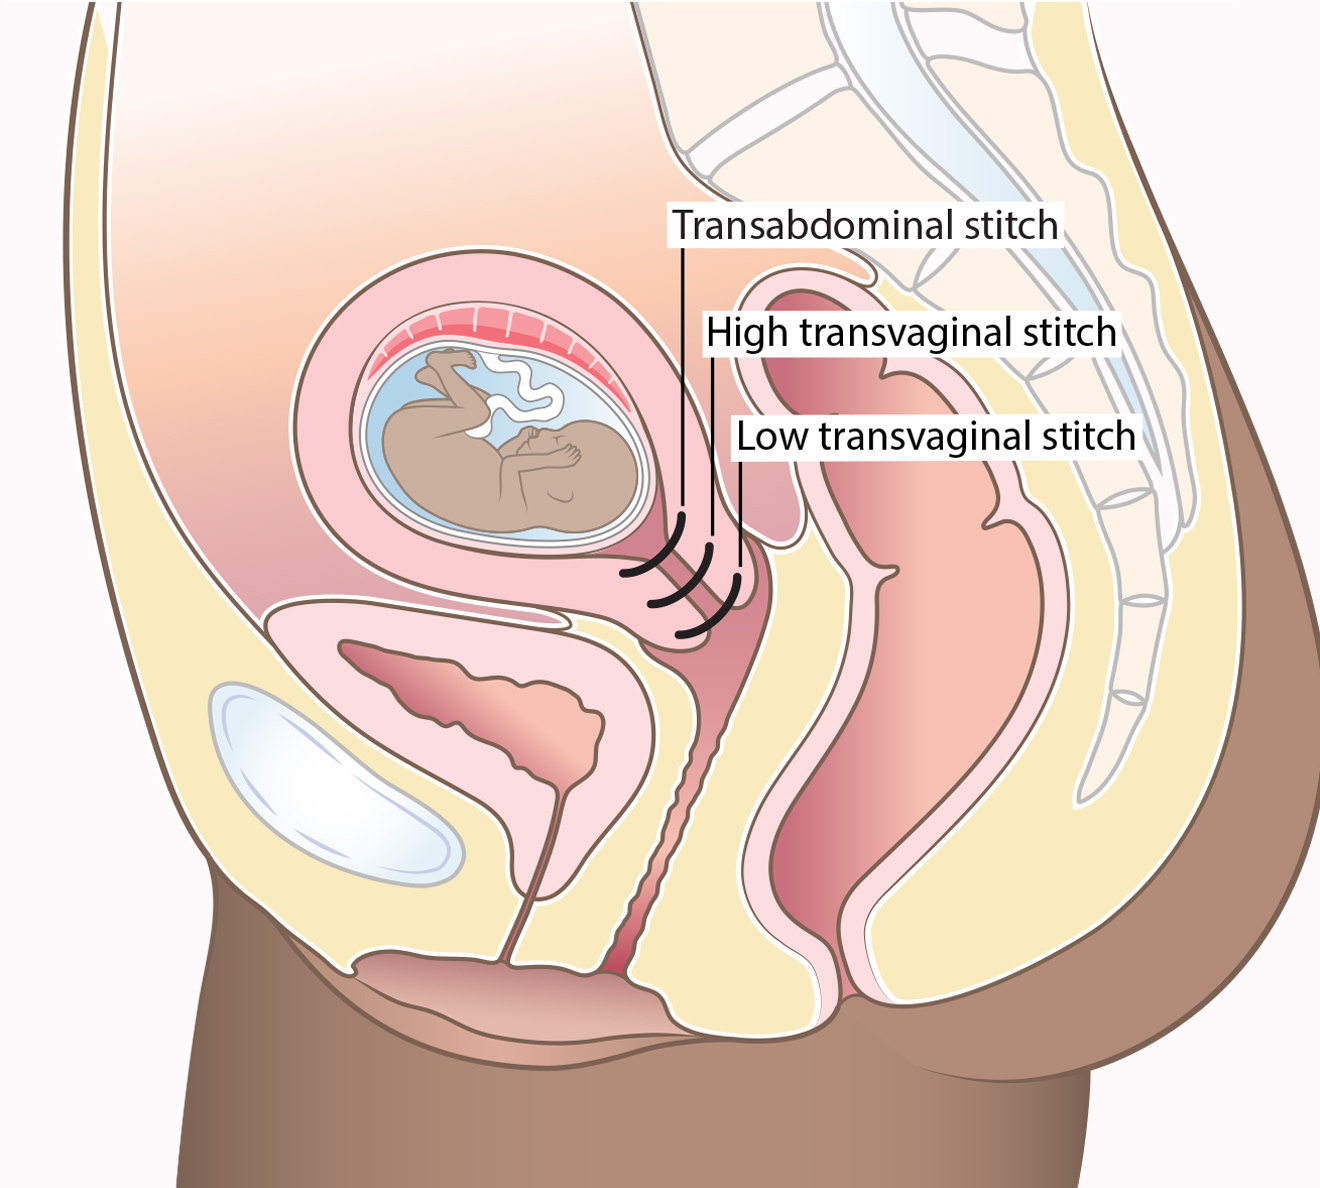 Diagram showing different types of cerclages (stitches) that can be used to reduce the risk of late miscarriage and premature birth.